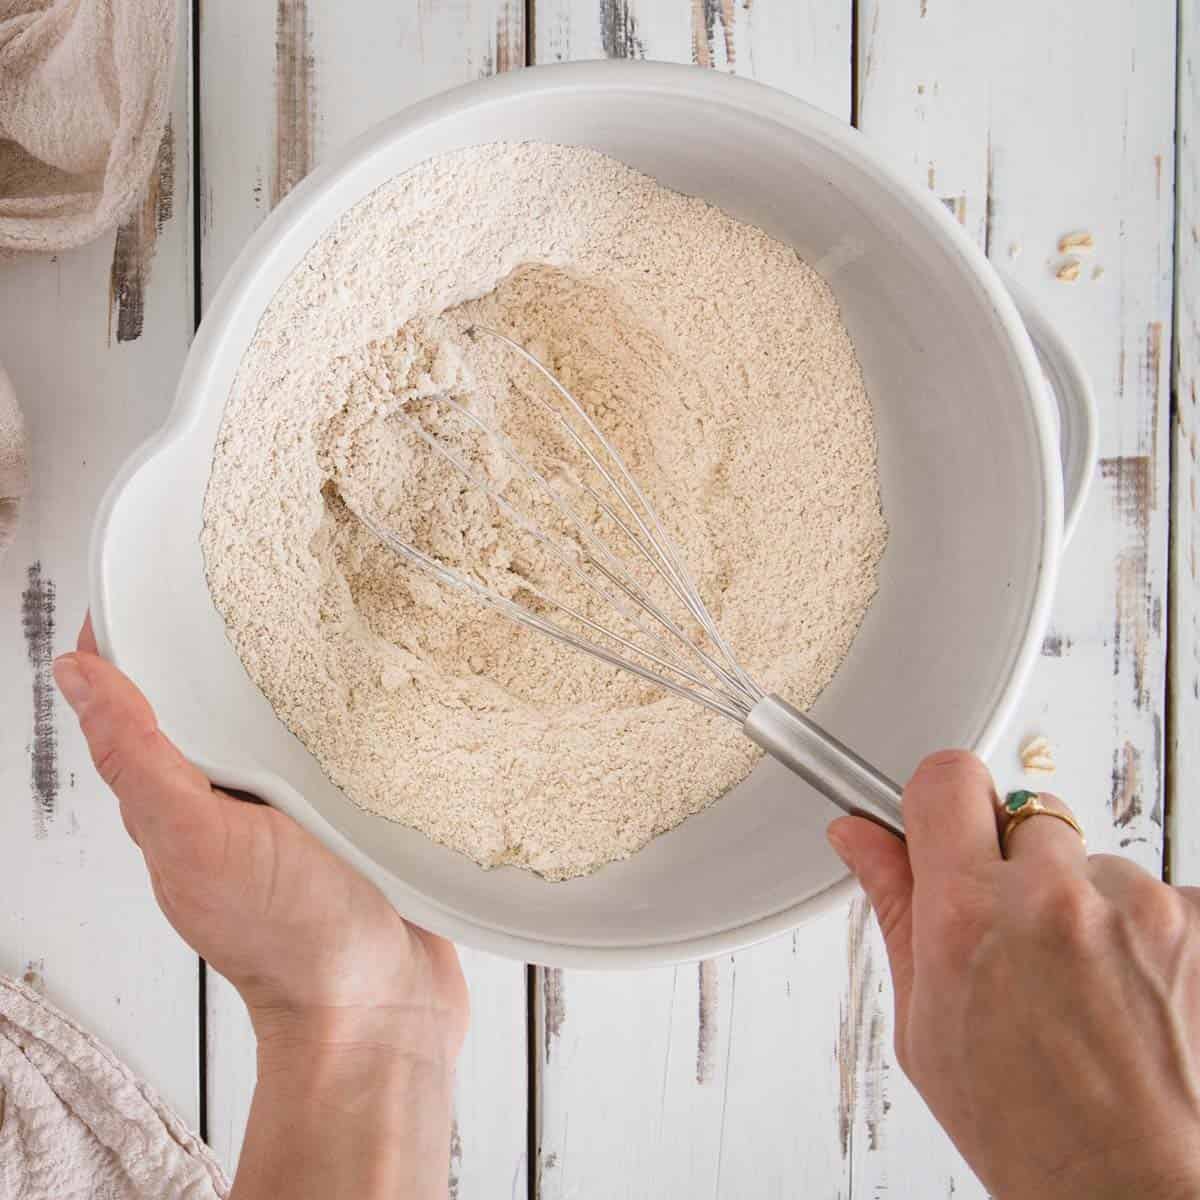 Hand whisking flour mixture in a bowl